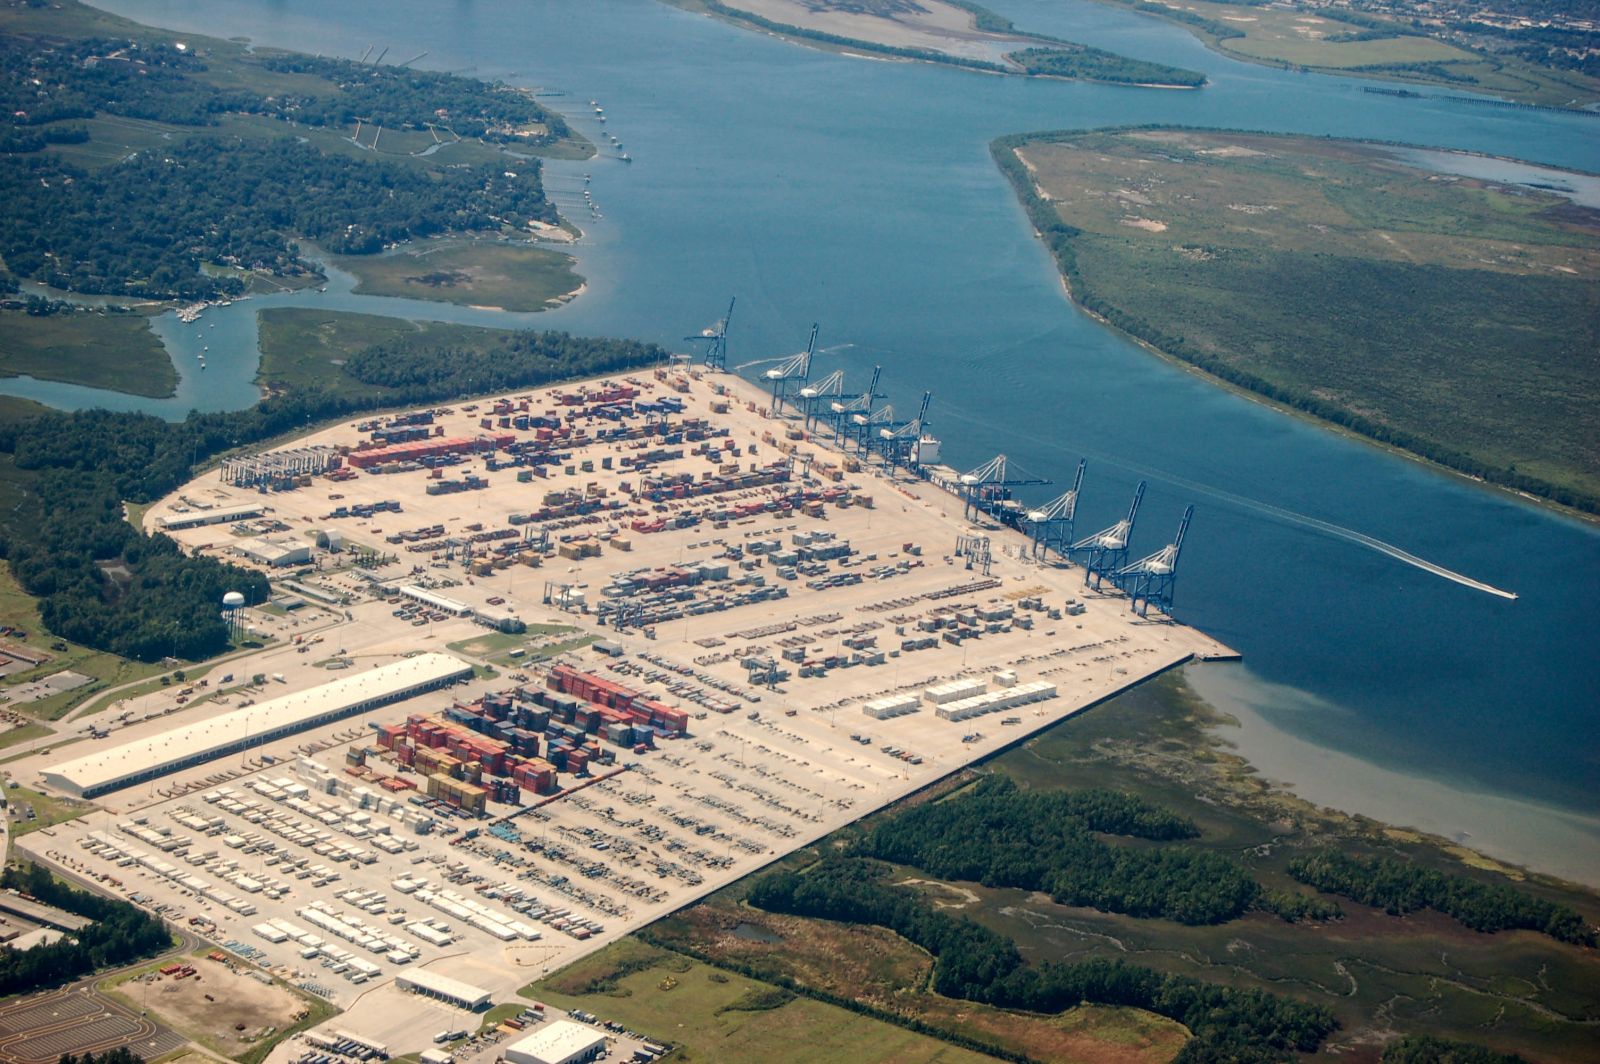 The Wando Welch Terminal is viewed from the air. The S.C. Ports Authority reported a 13% increase in the number of pier containers moved in August compared to last year. (Photo/file)